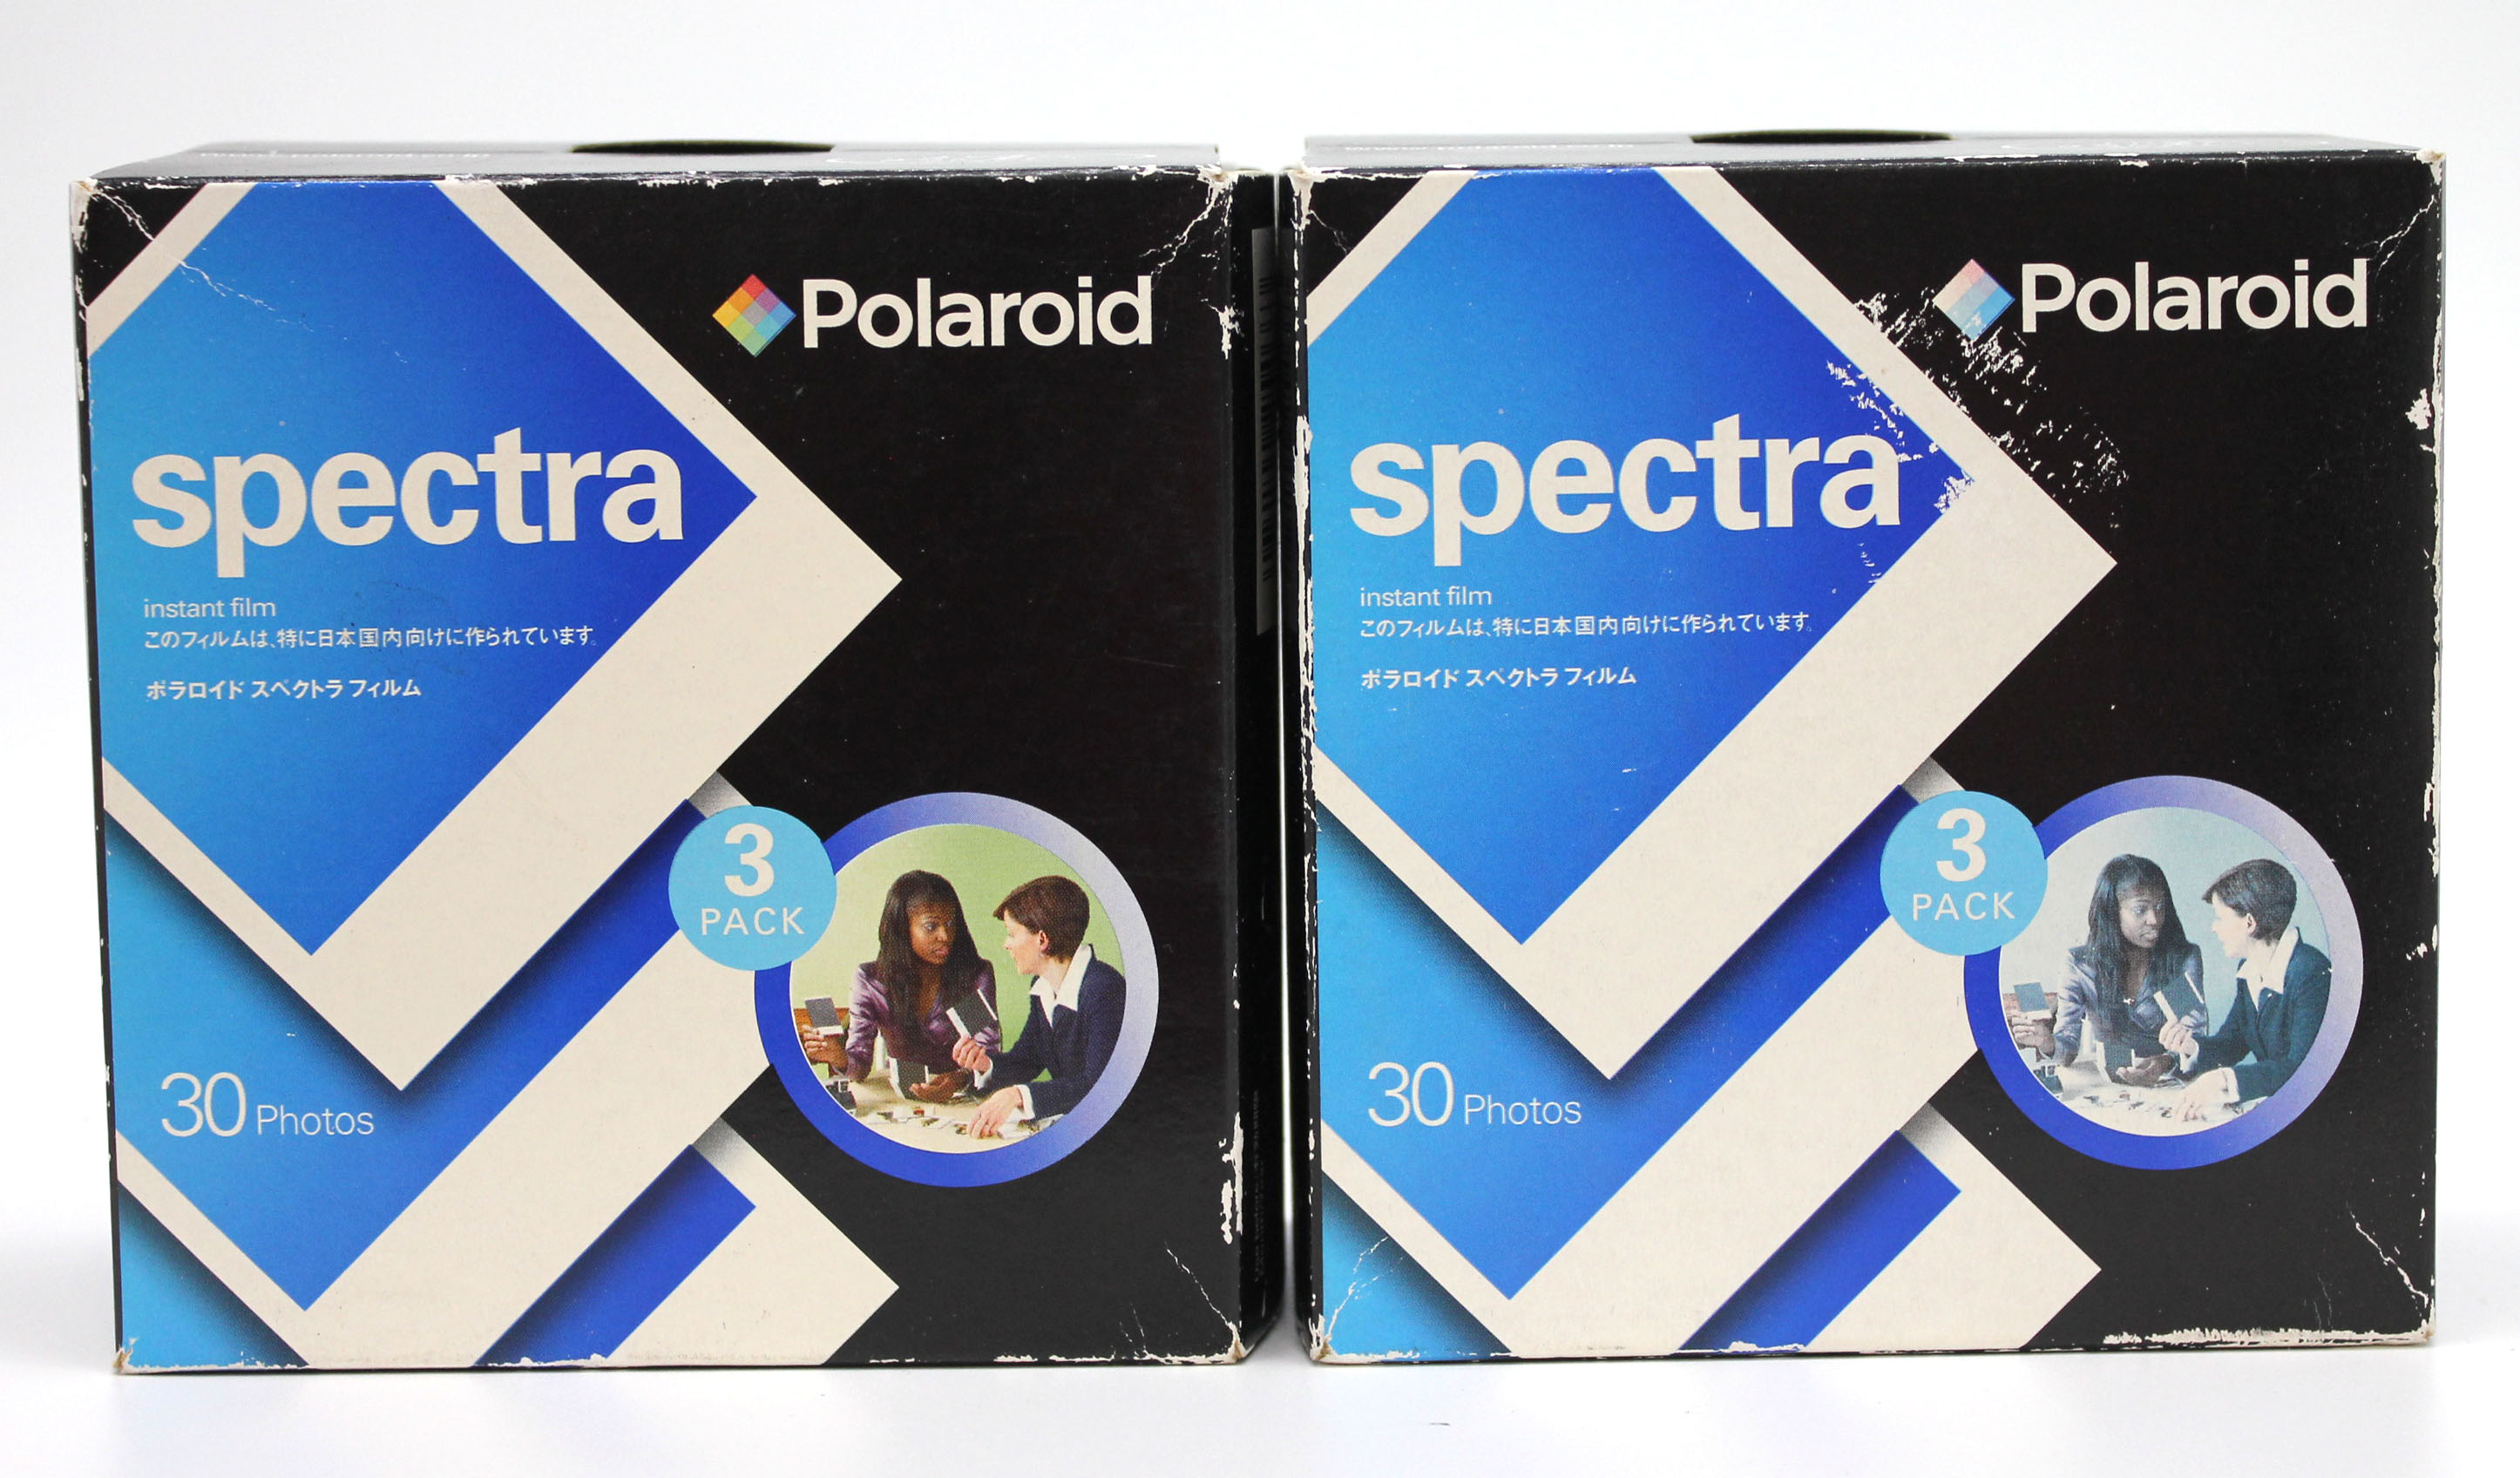 [New] Polaroid 664 spectra Instant Pack Film 30 photos (2 Packs) Expired 01/07 from Japan